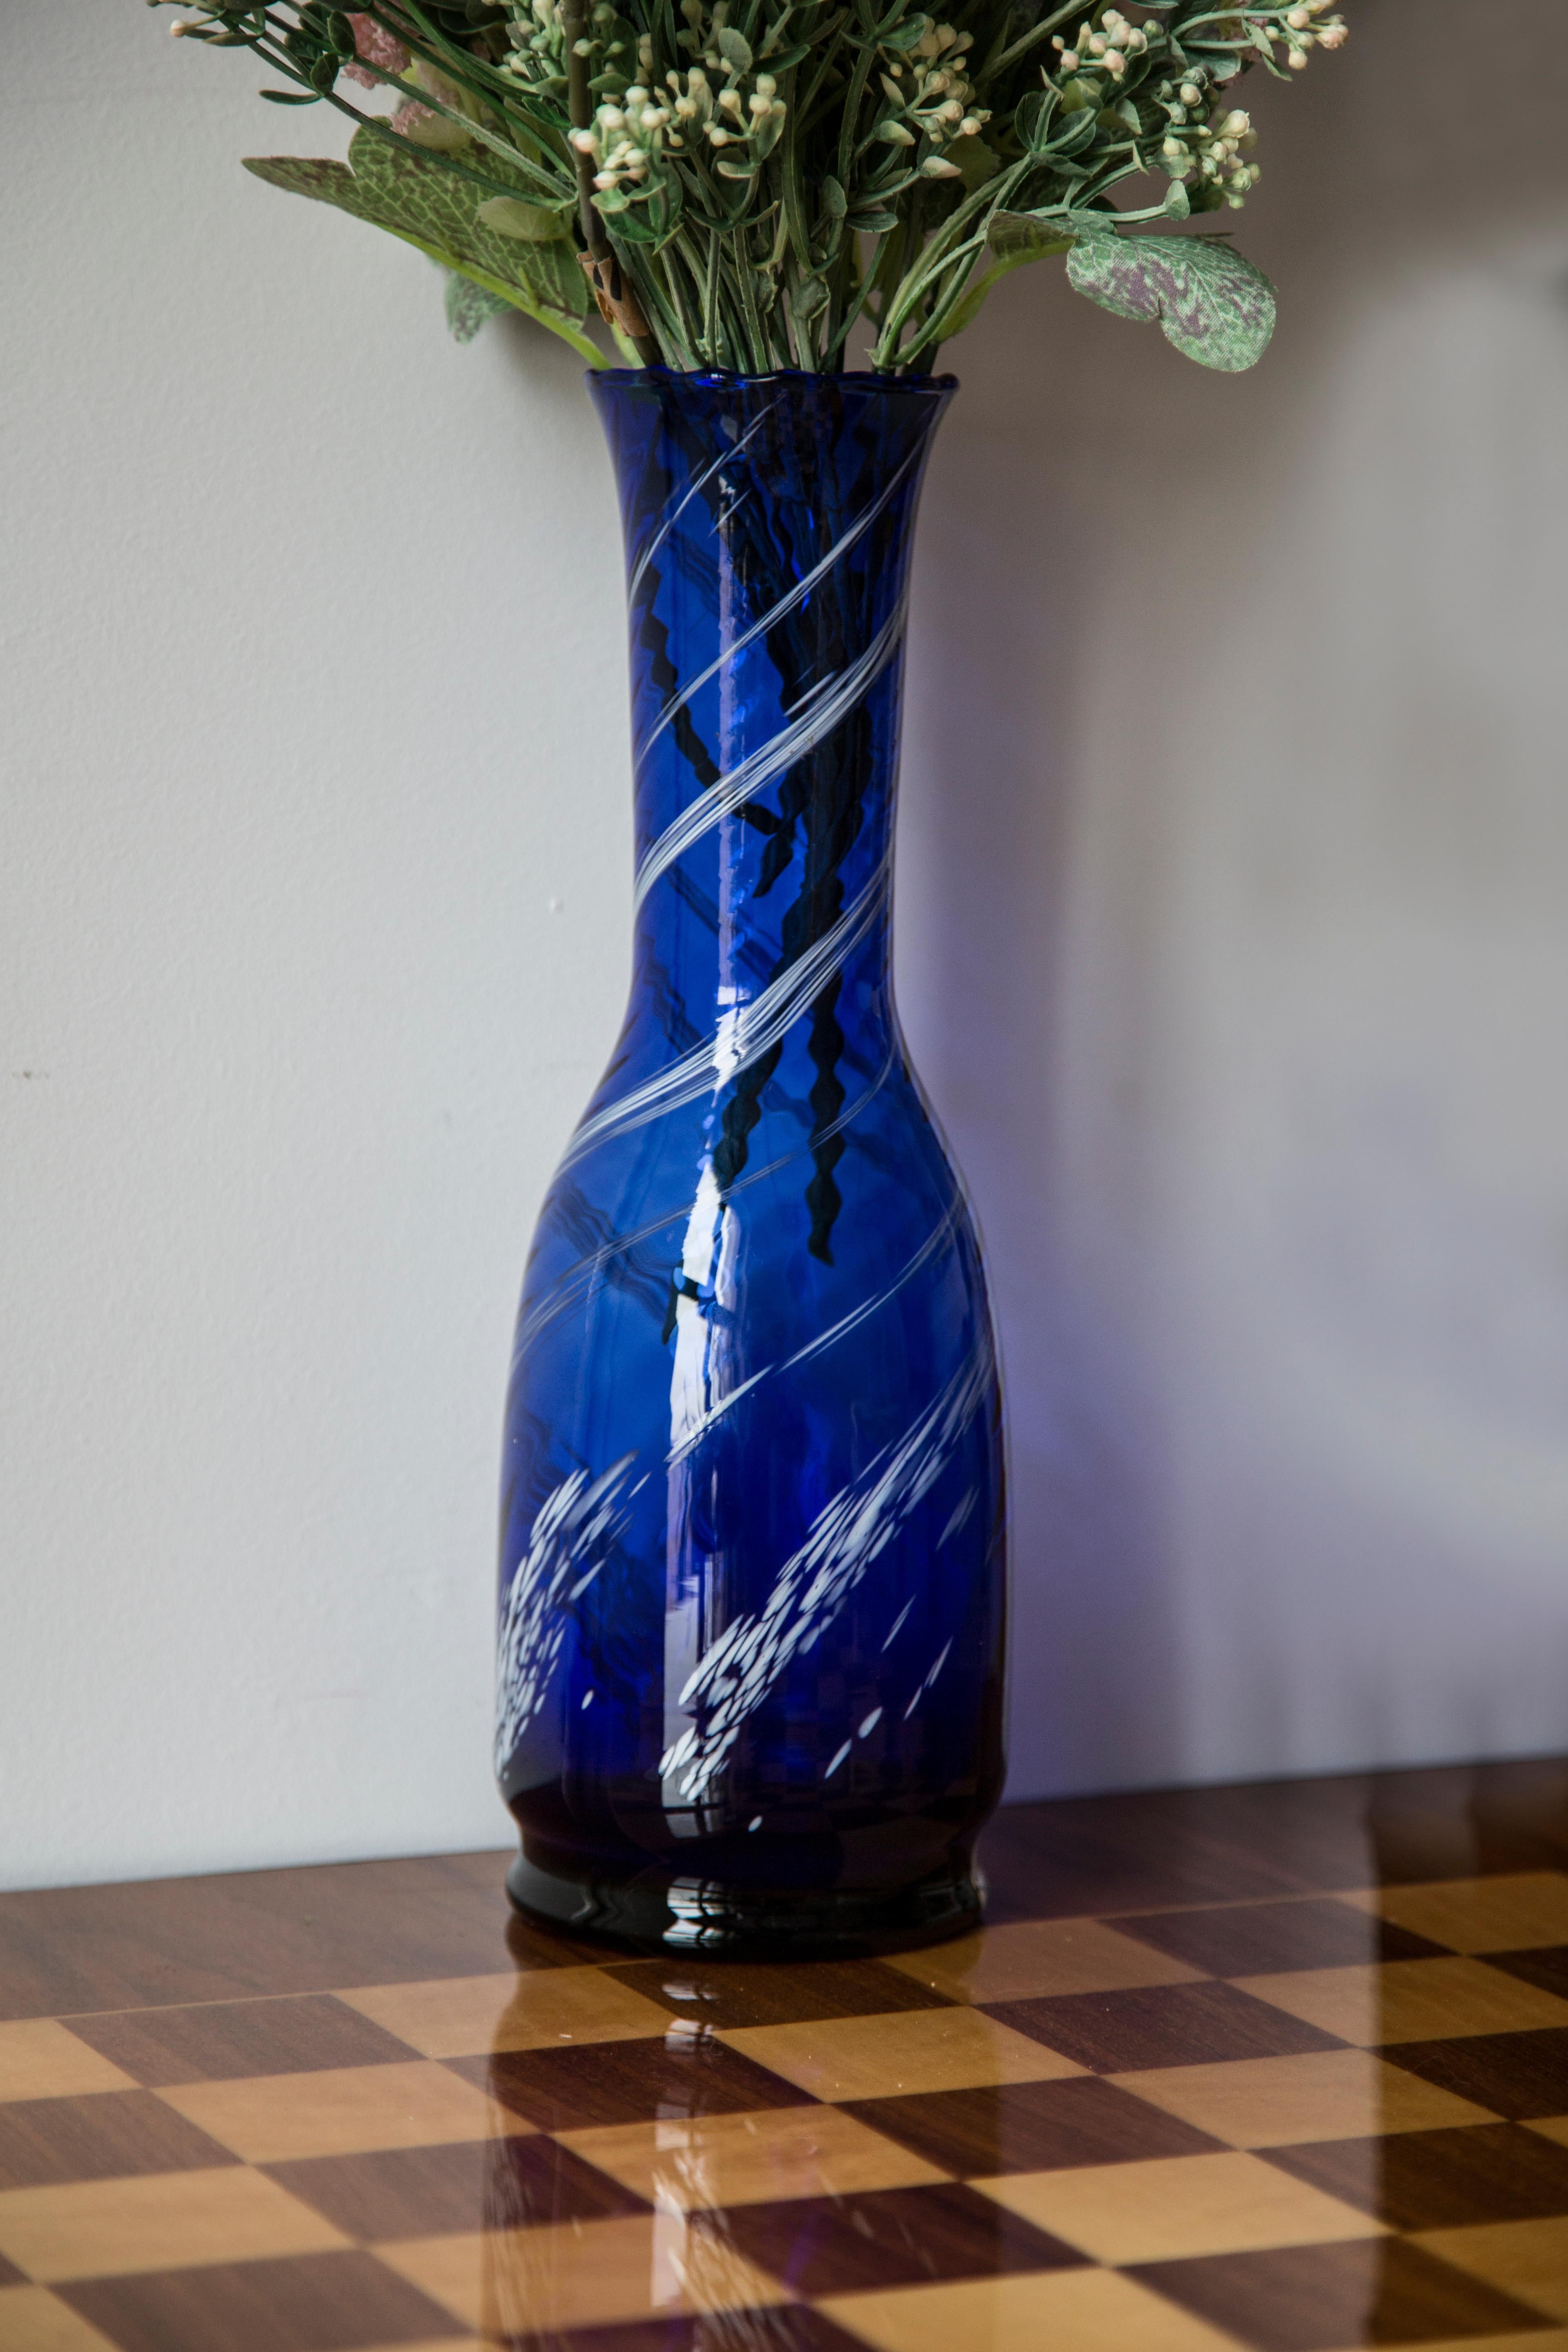 Mid-Century Modern Mid Century Vintage Blue and White Artistic Glass Vase Bottle, Europe, 1970s For Sale